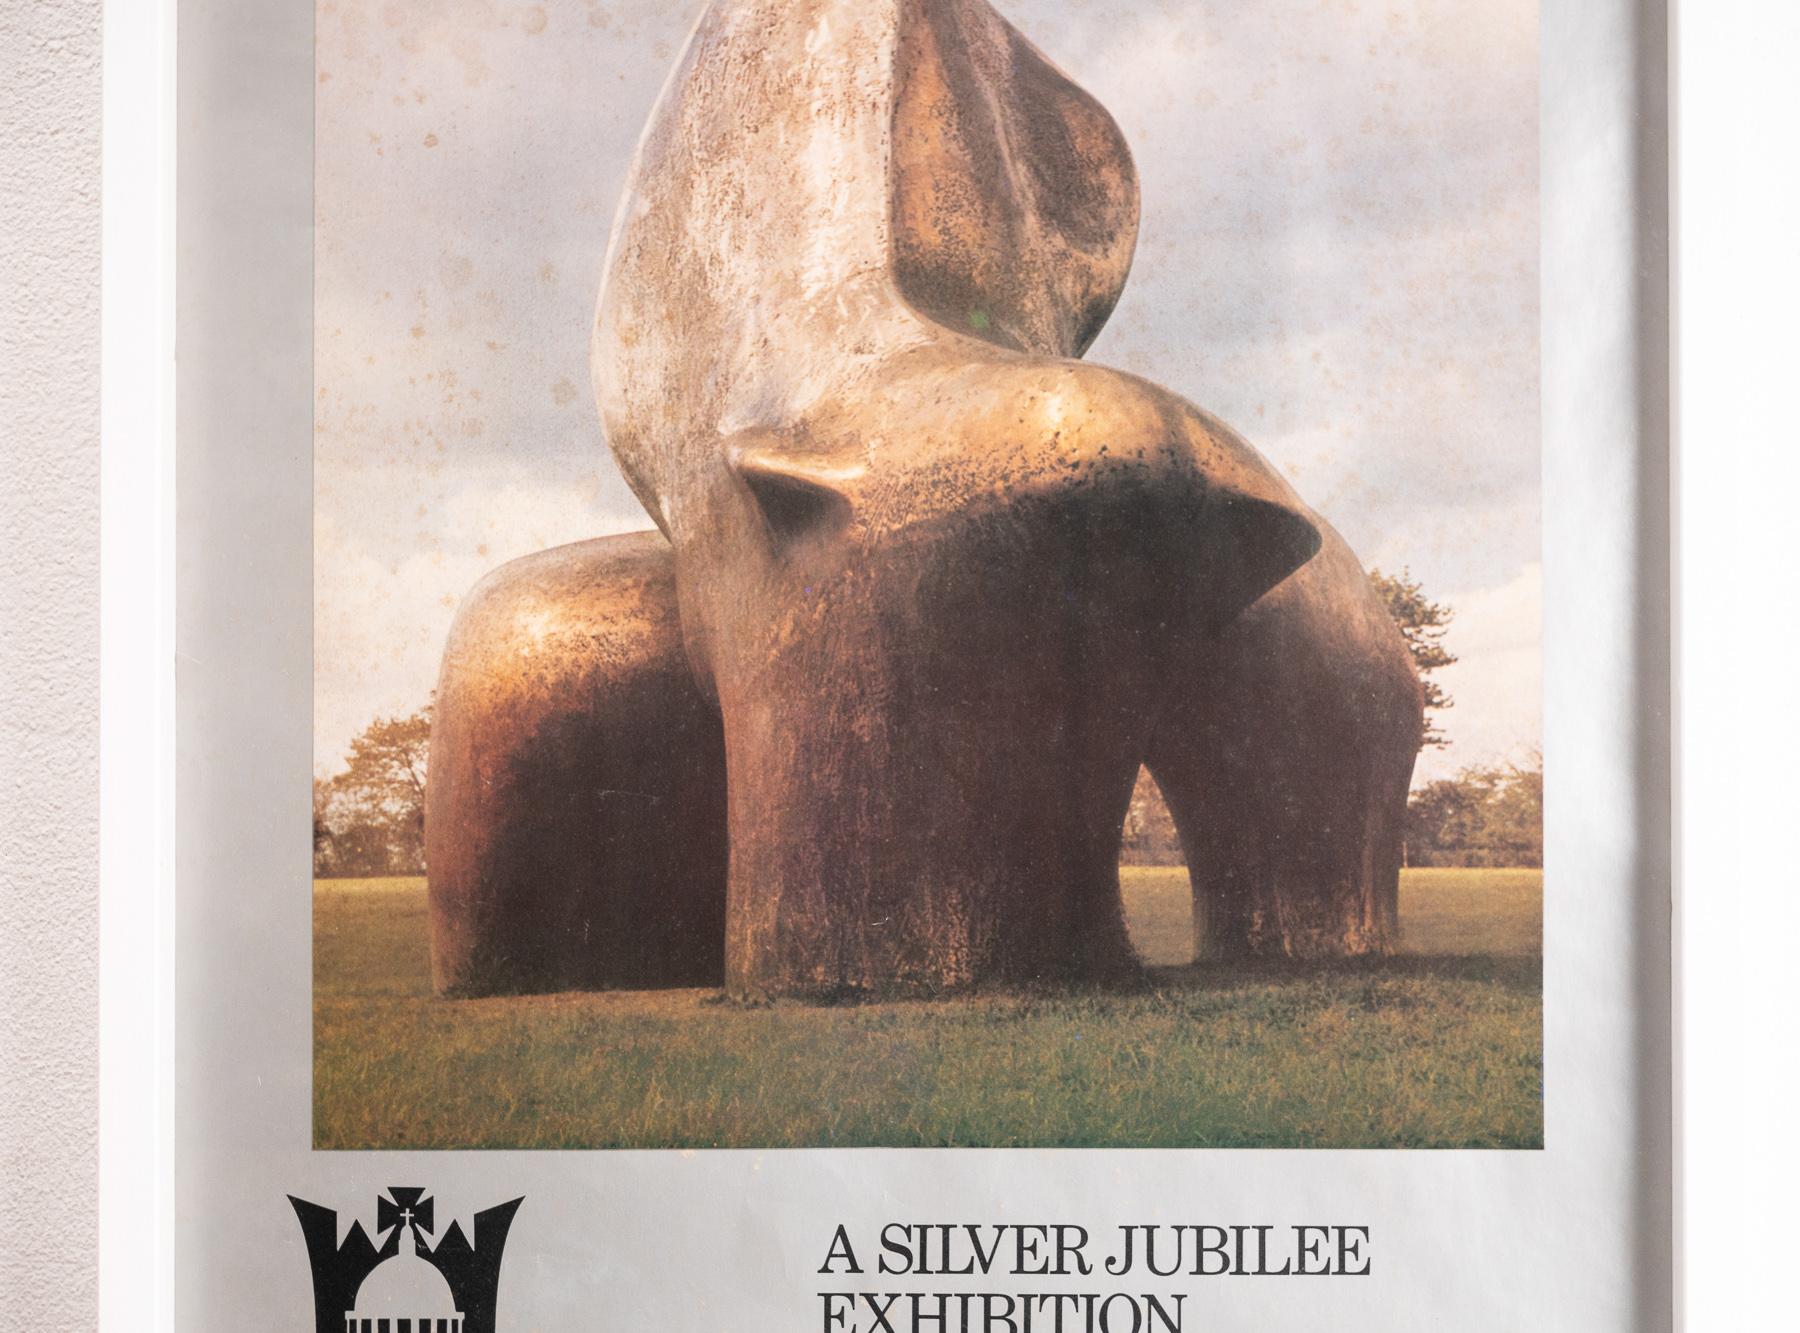 English Signed Henry Moore Poster for Silver Jubilee Exhibition of Sculpture 1977 For Sale